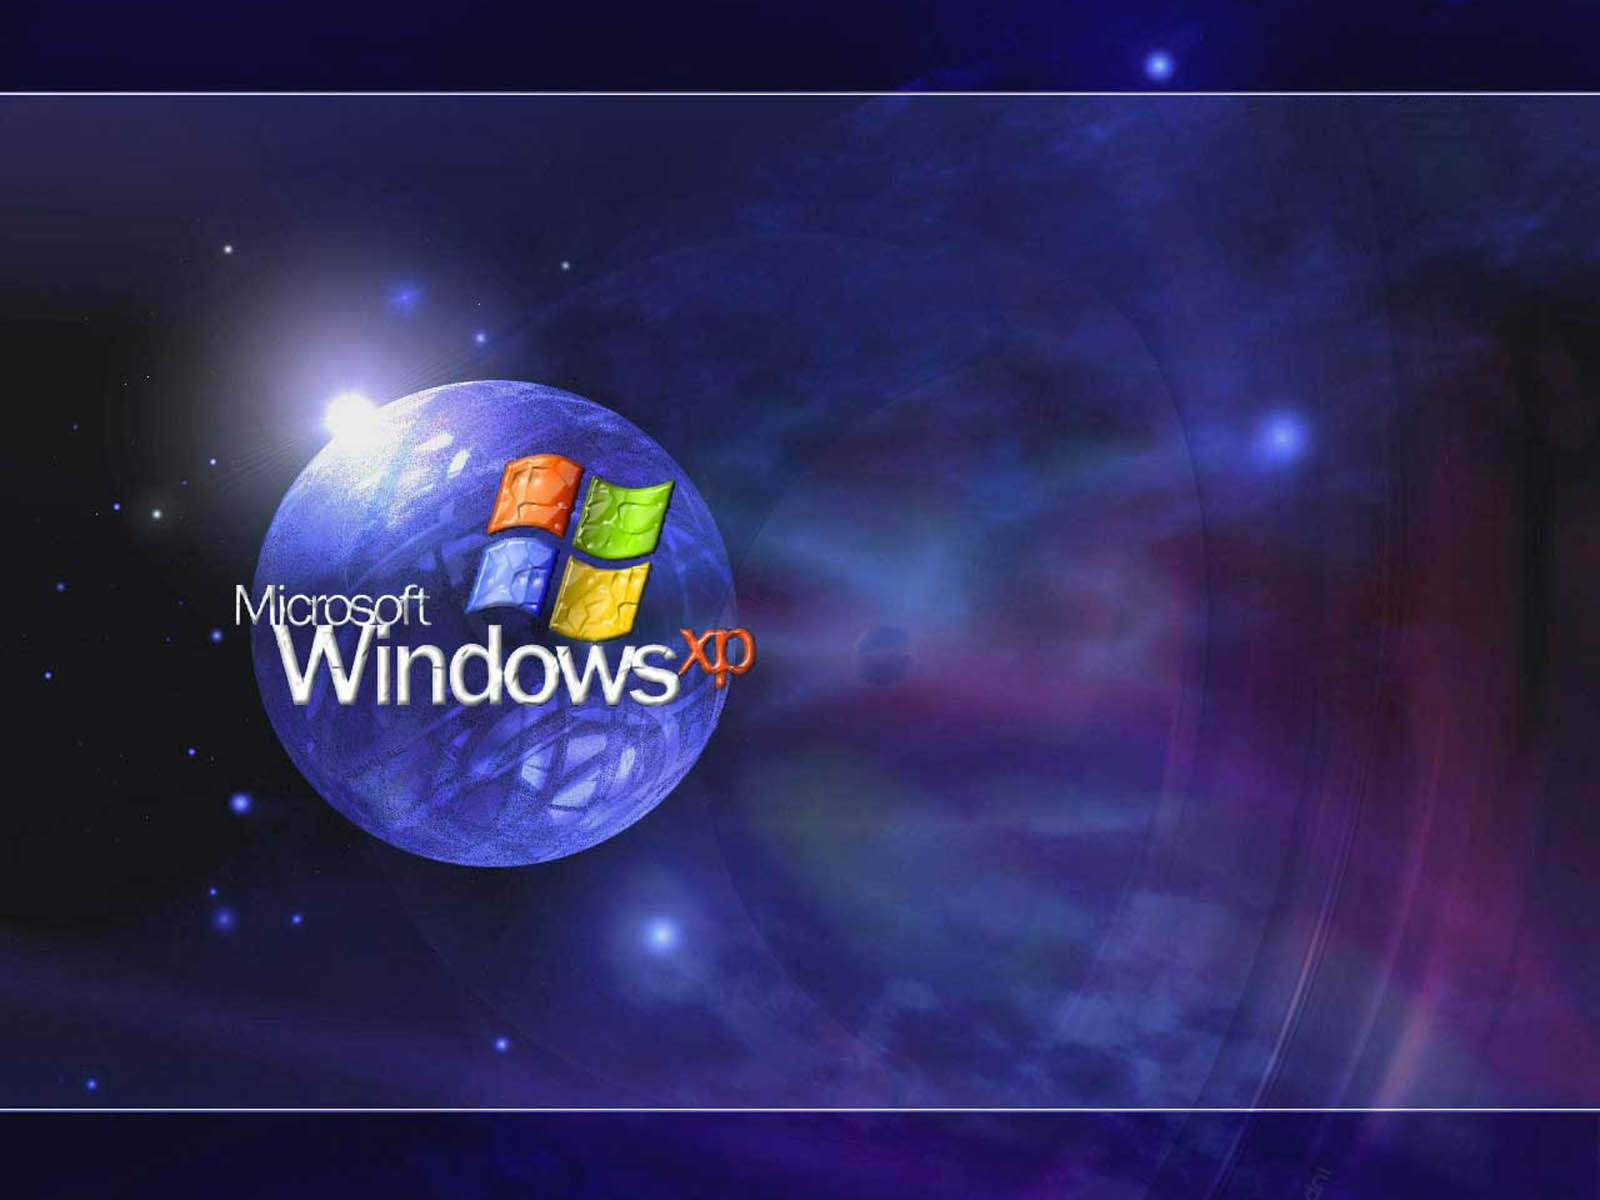  wallpapers  Windows  XP  Wallpapers 